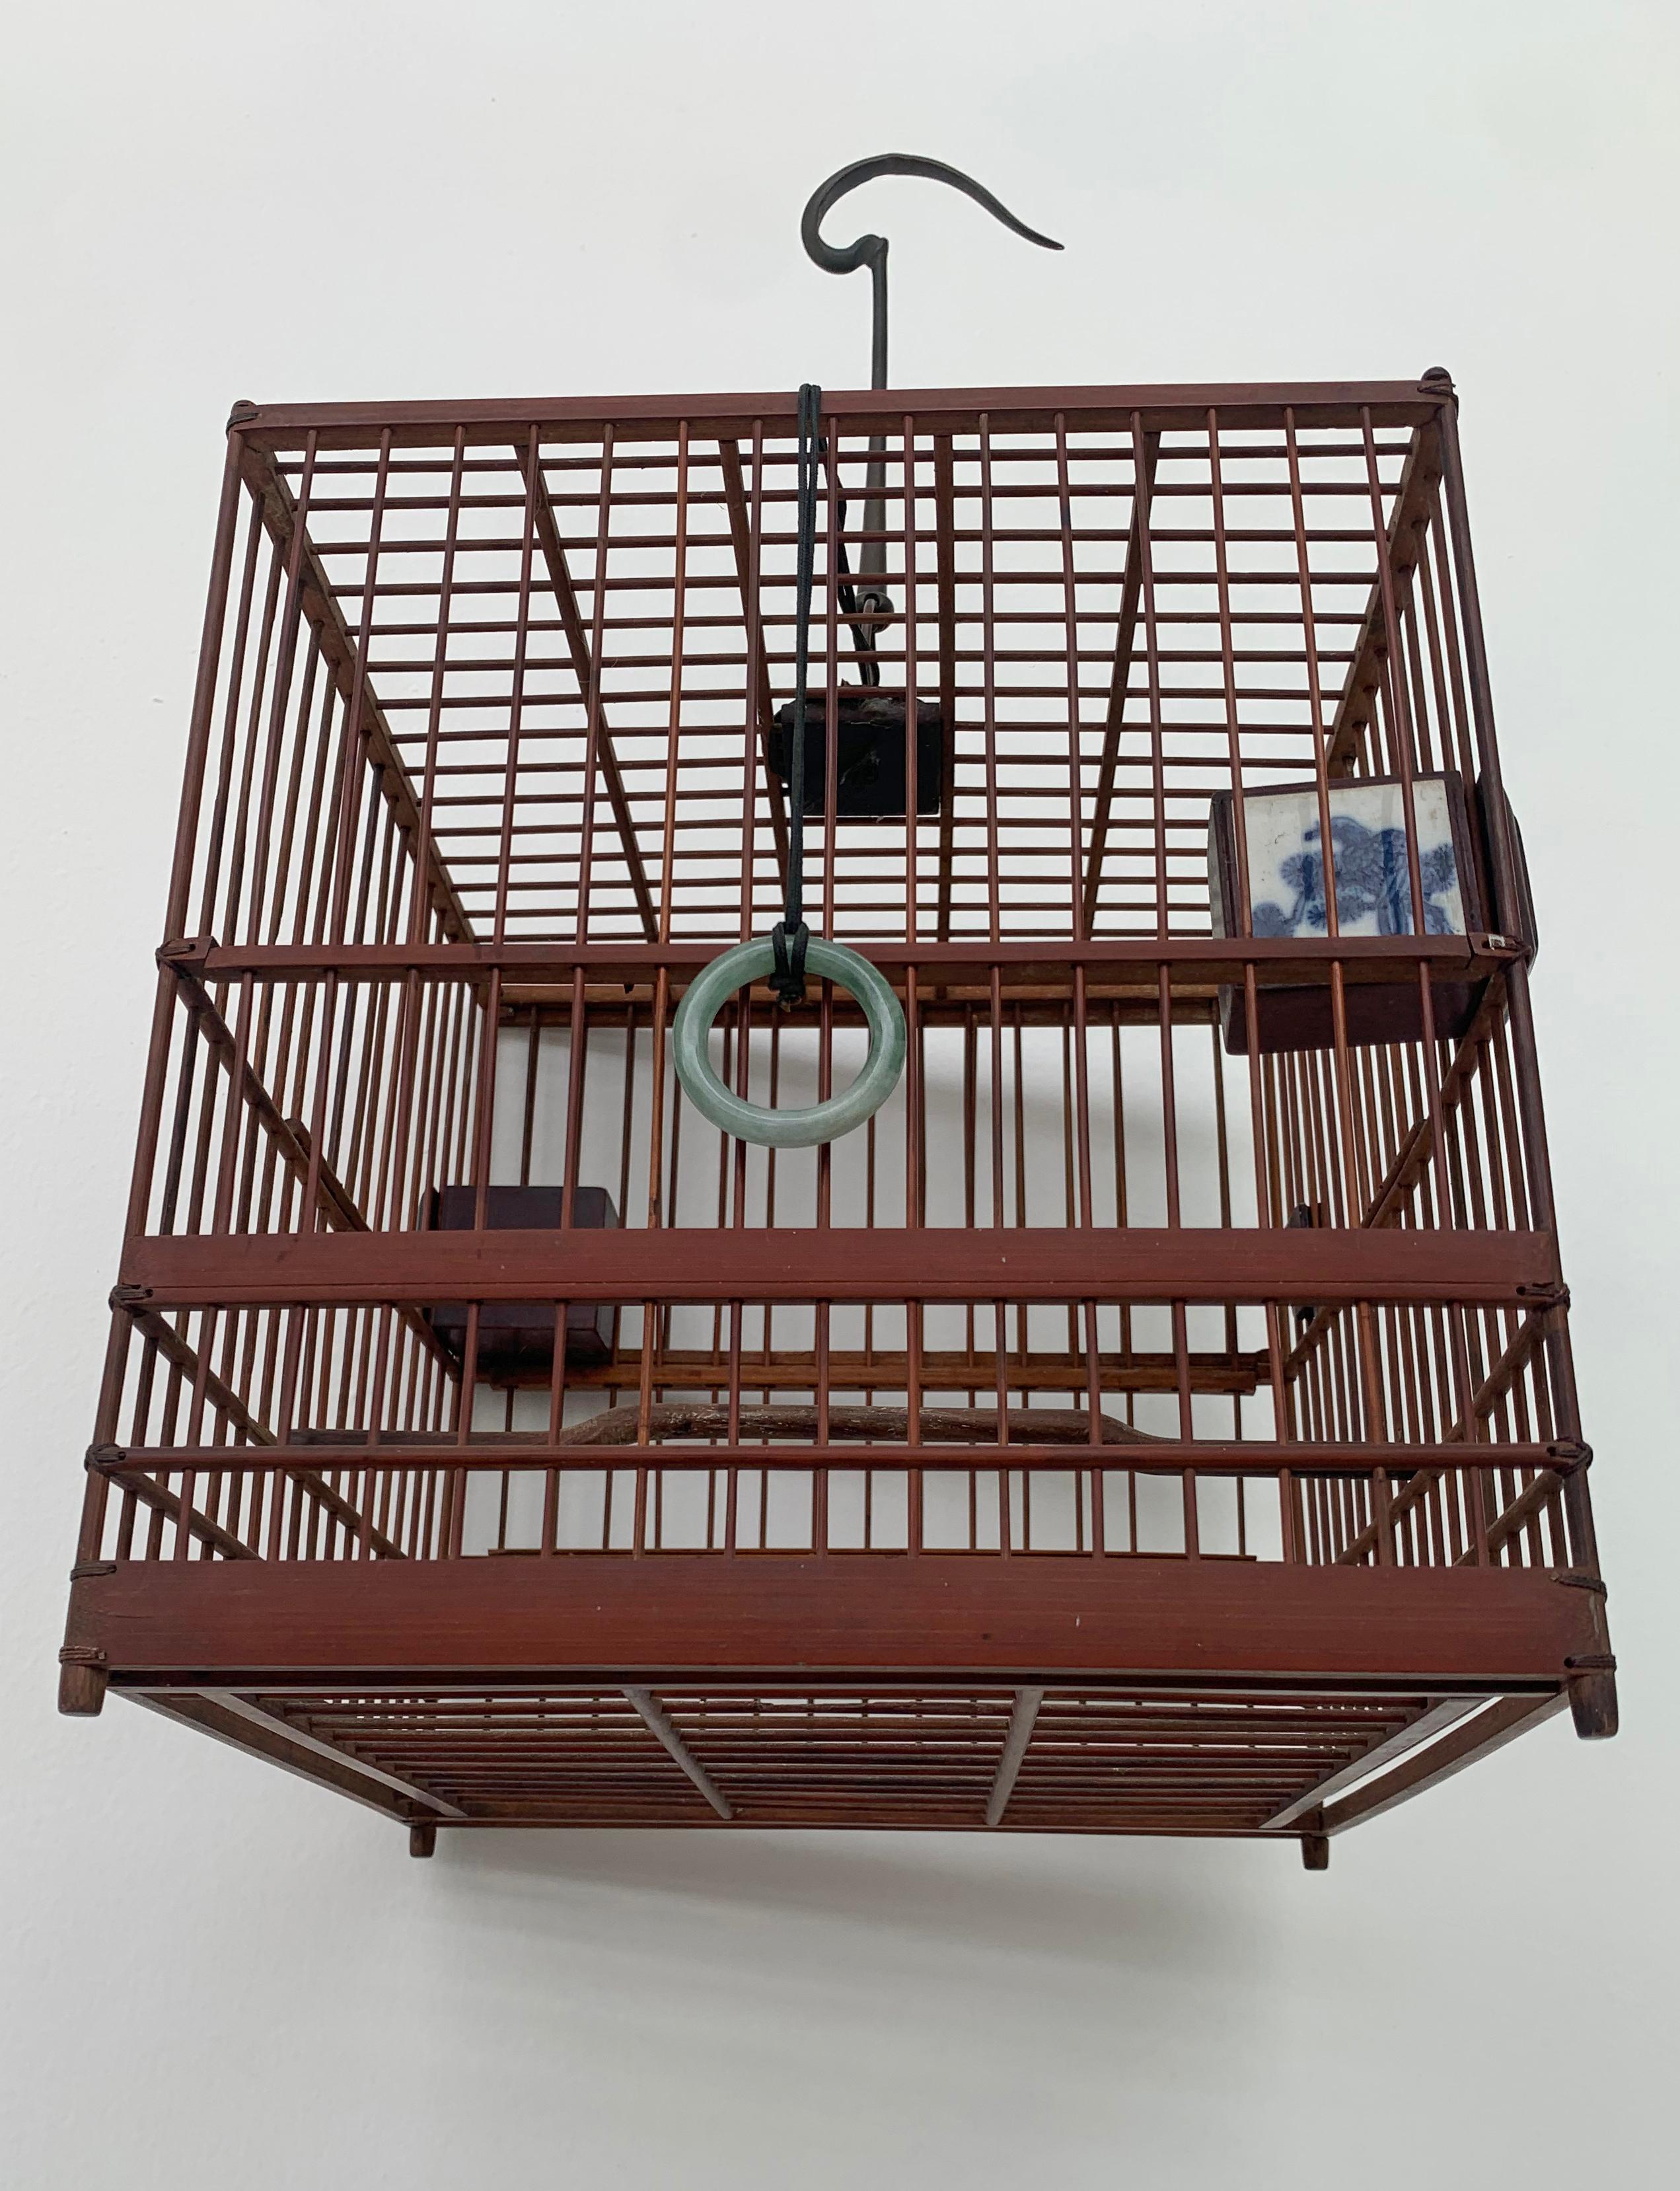 Hand-Crafted Chinese Birdcage with Porcelain Feeding Bowls, Vintage Mid-20th Century For Sale